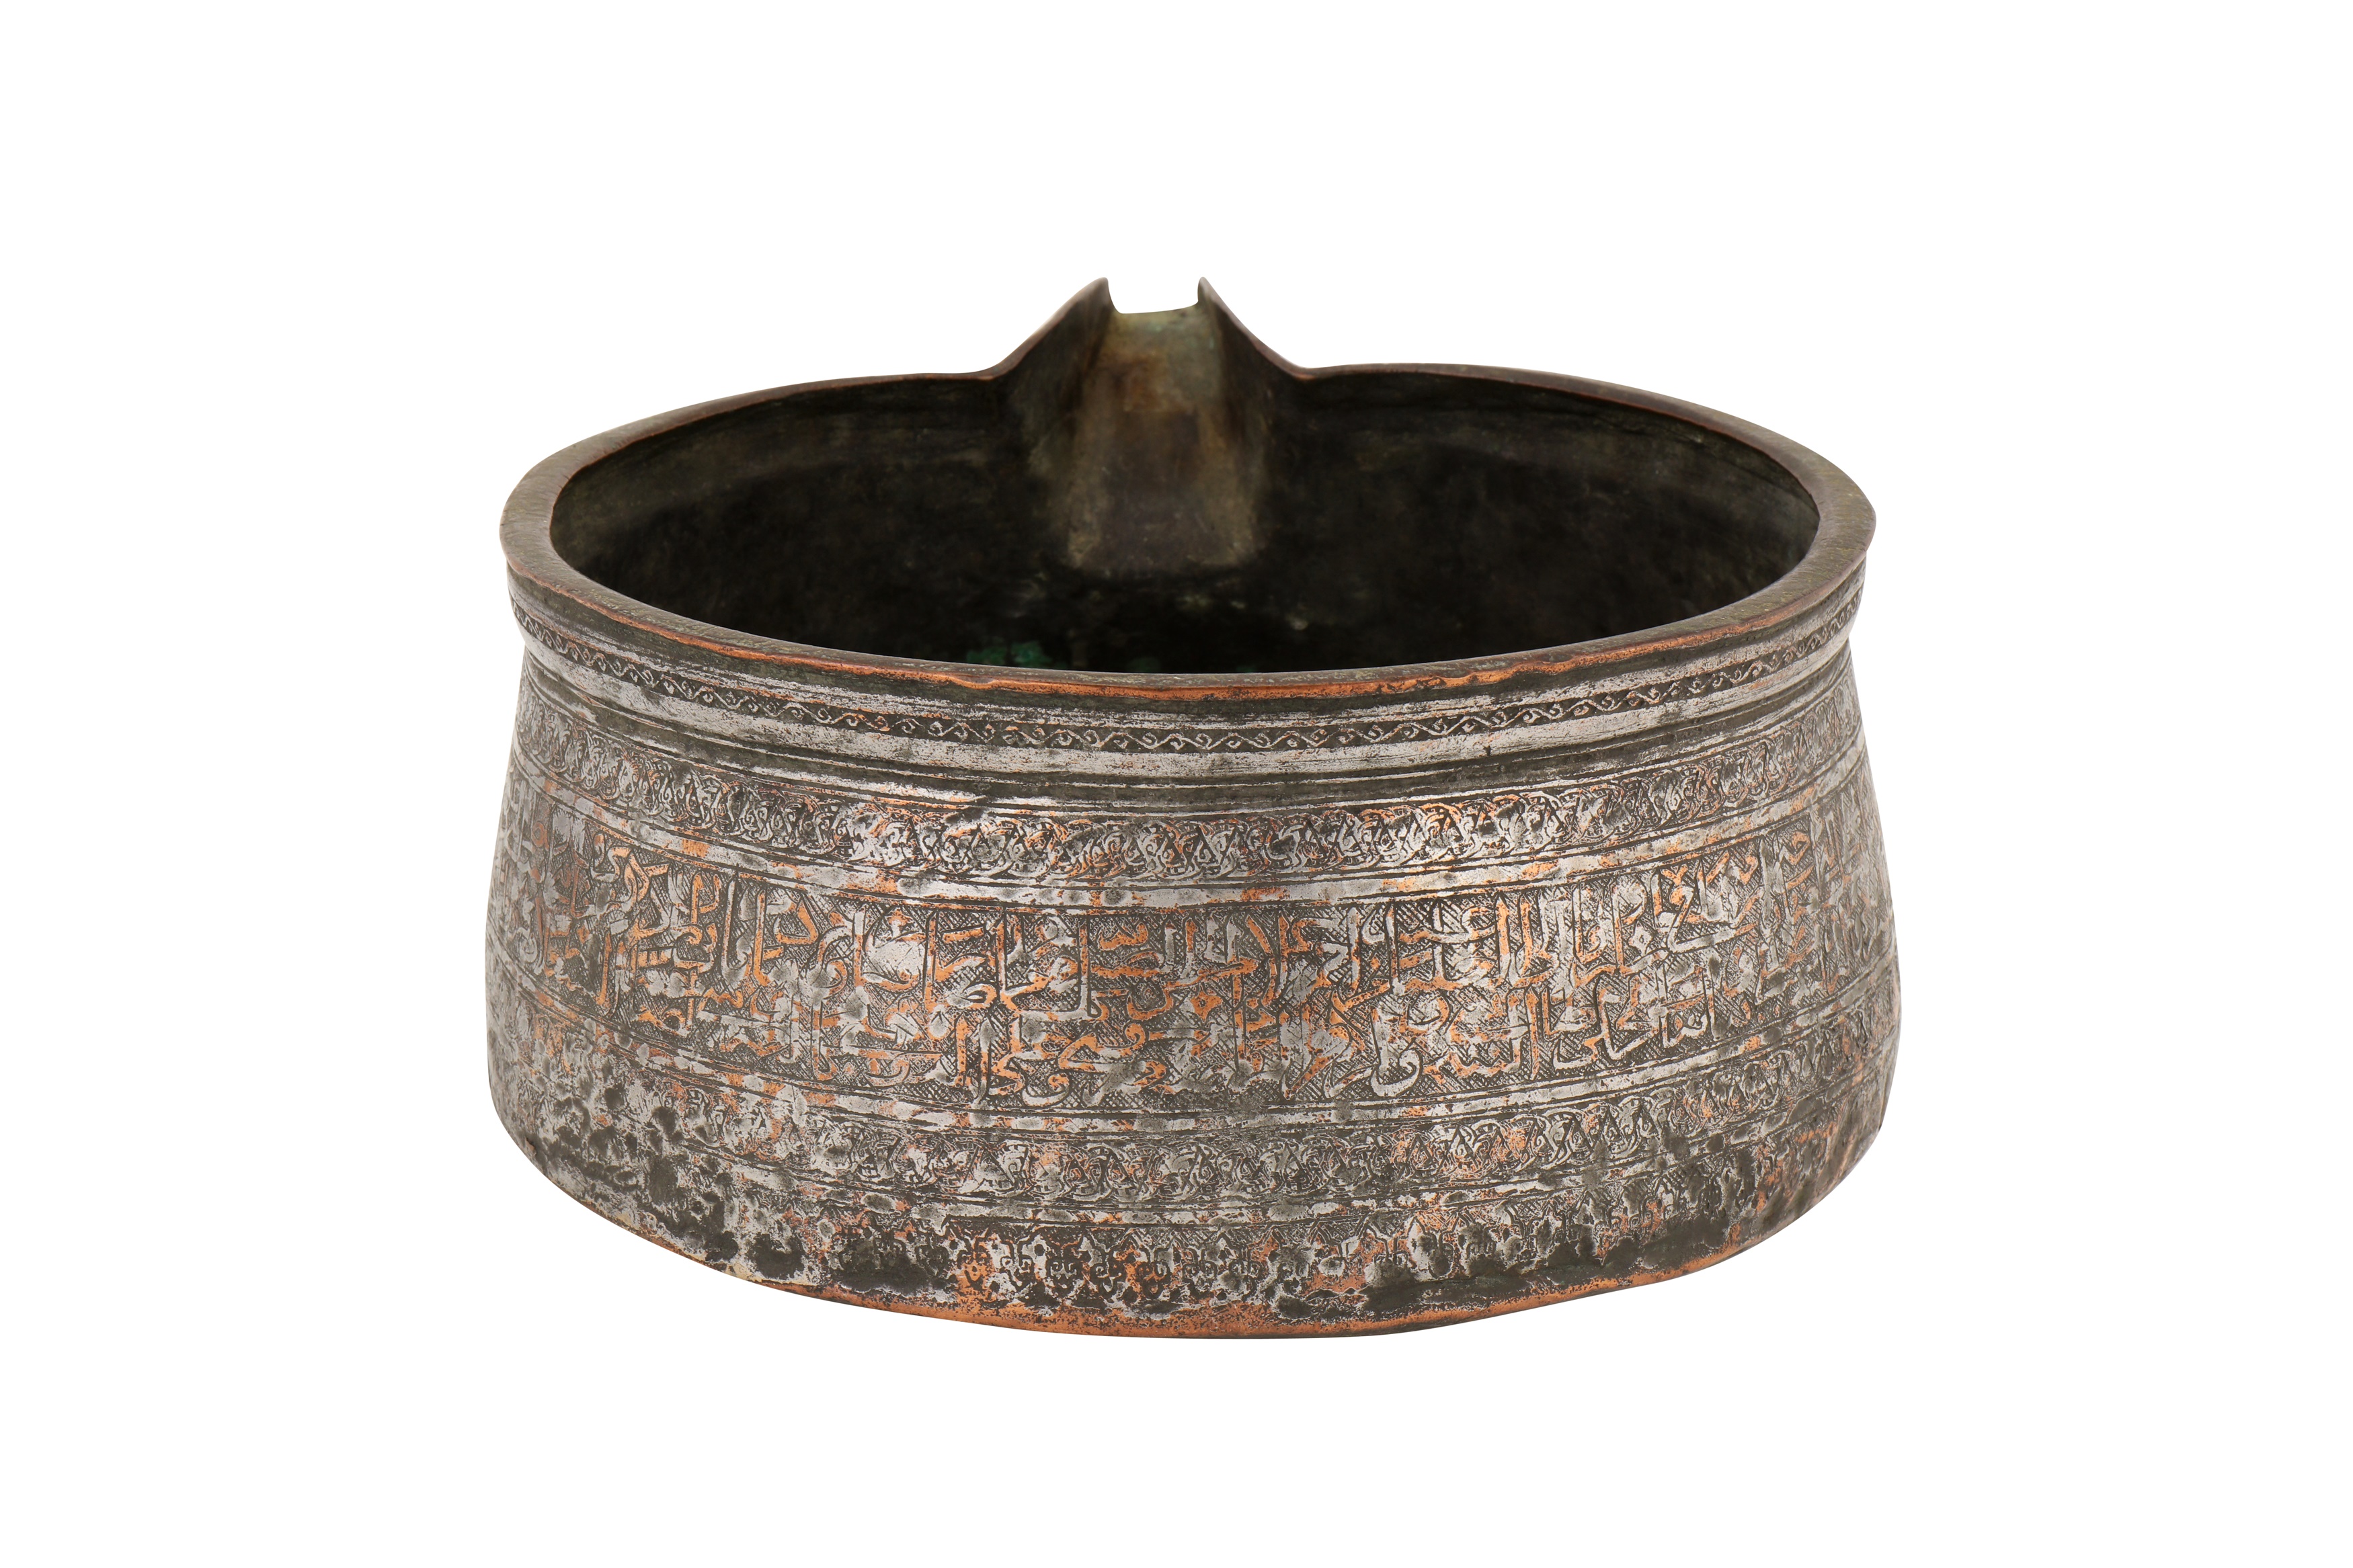 A 14TH-15TH CENTURY SYRIAN MAMLUK TINNED COPPER SPOUTED BOWL - Image 4 of 5